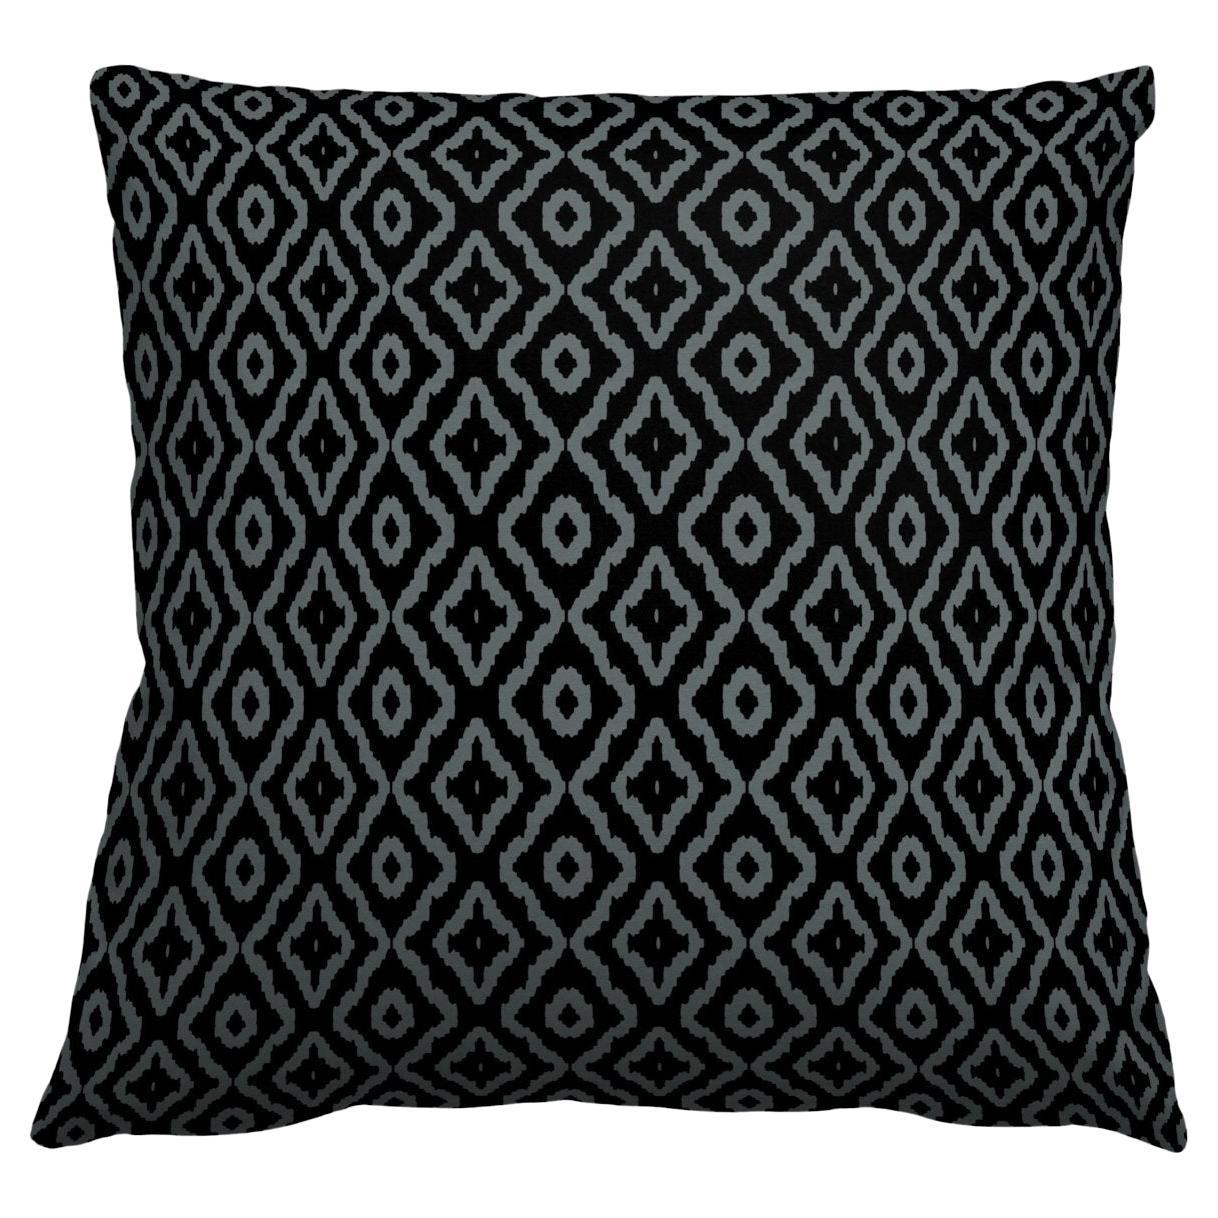 Haze Petite Gray and Black Pillow For Sale